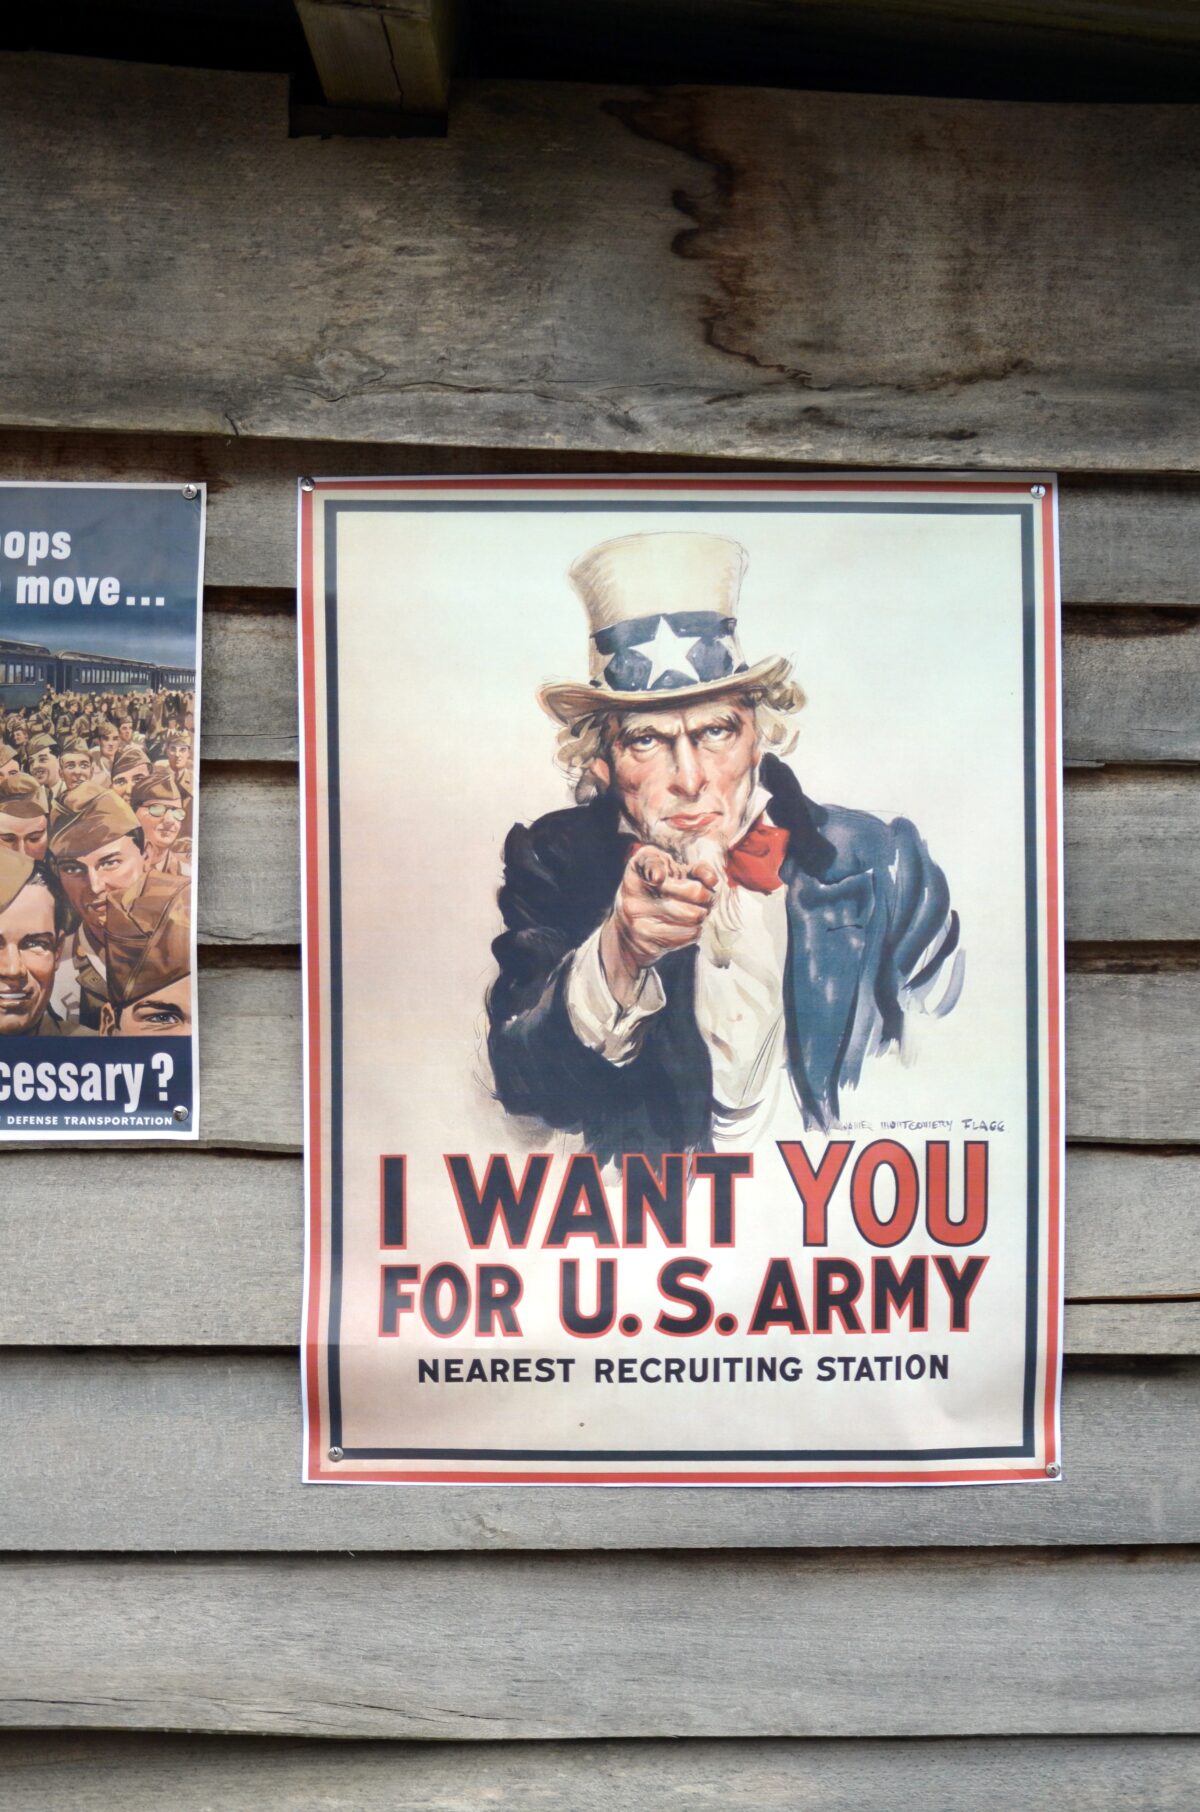 U.S. recruiting poster saying "I want you for the U.S. Army."